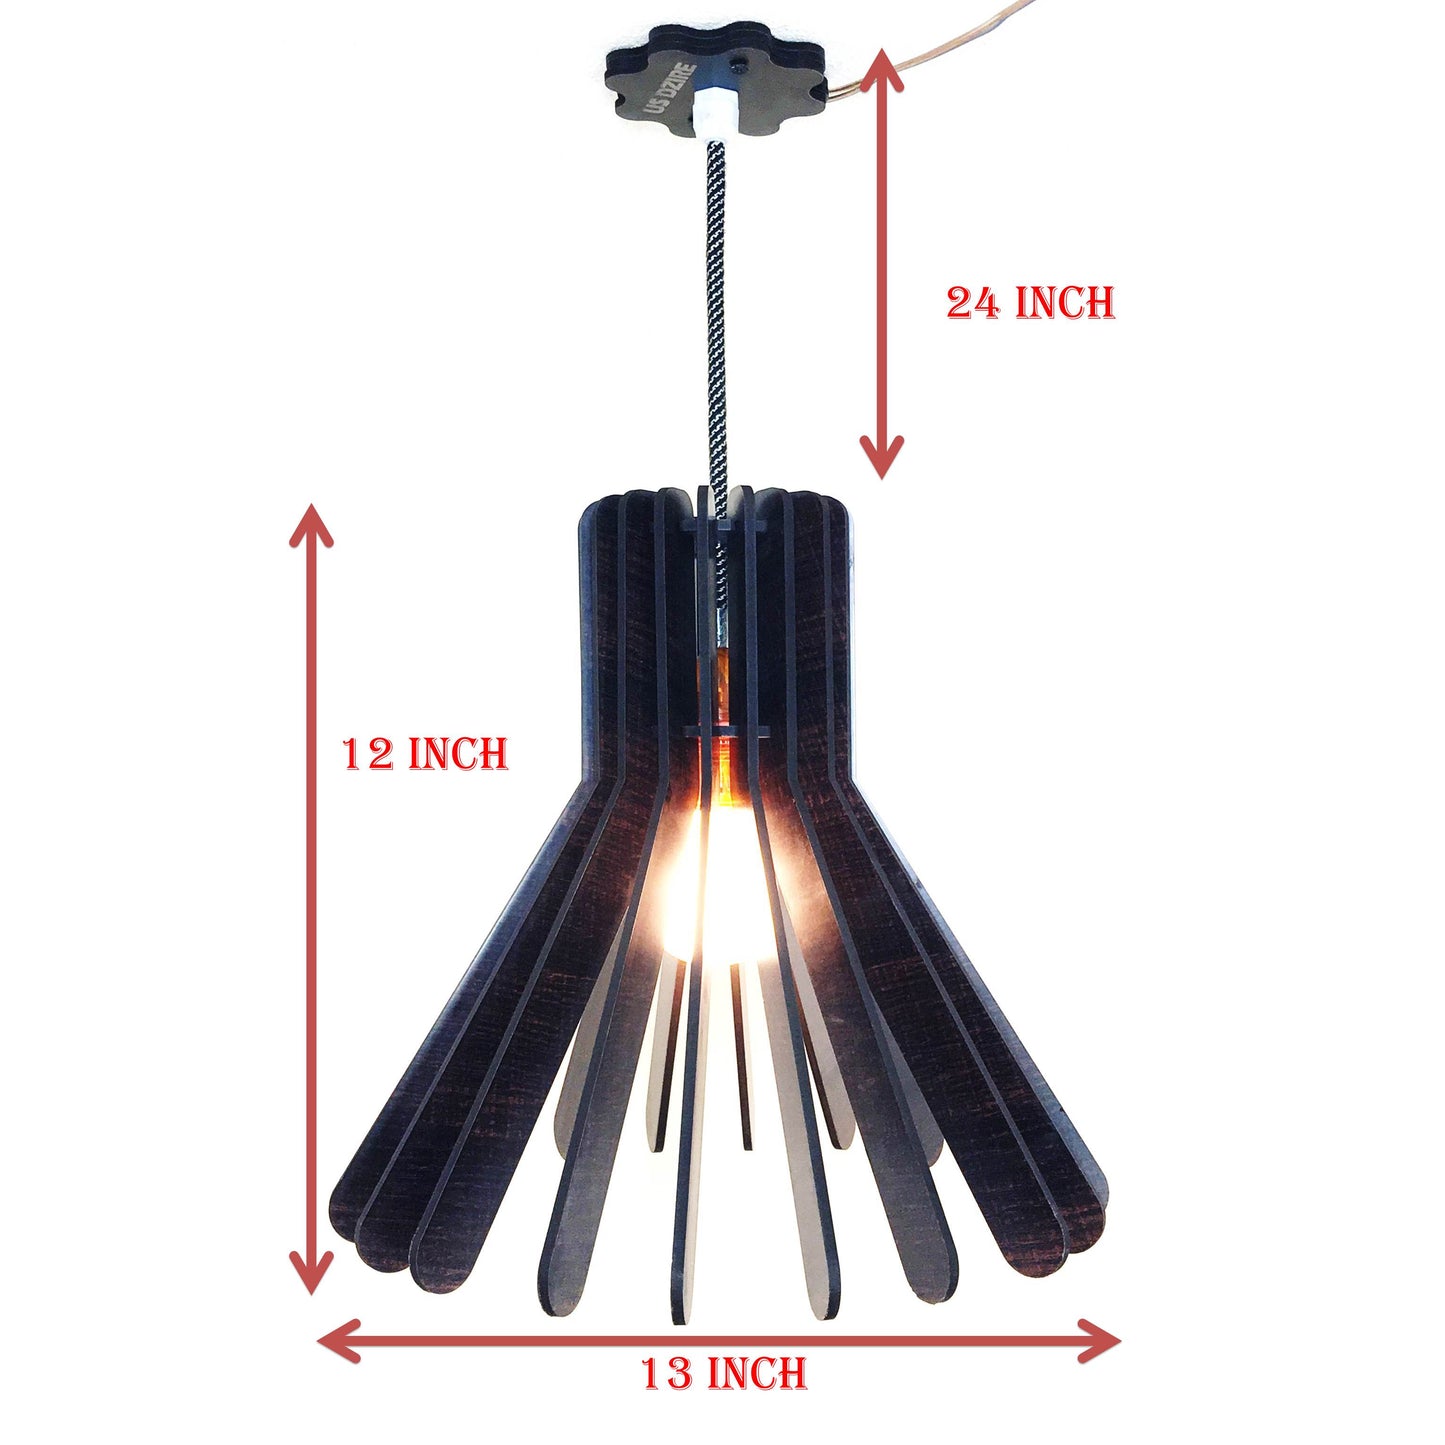 US DZIRE 152 Wood Ceiling Pendant Light Shade Hand Weave Chandelier Style